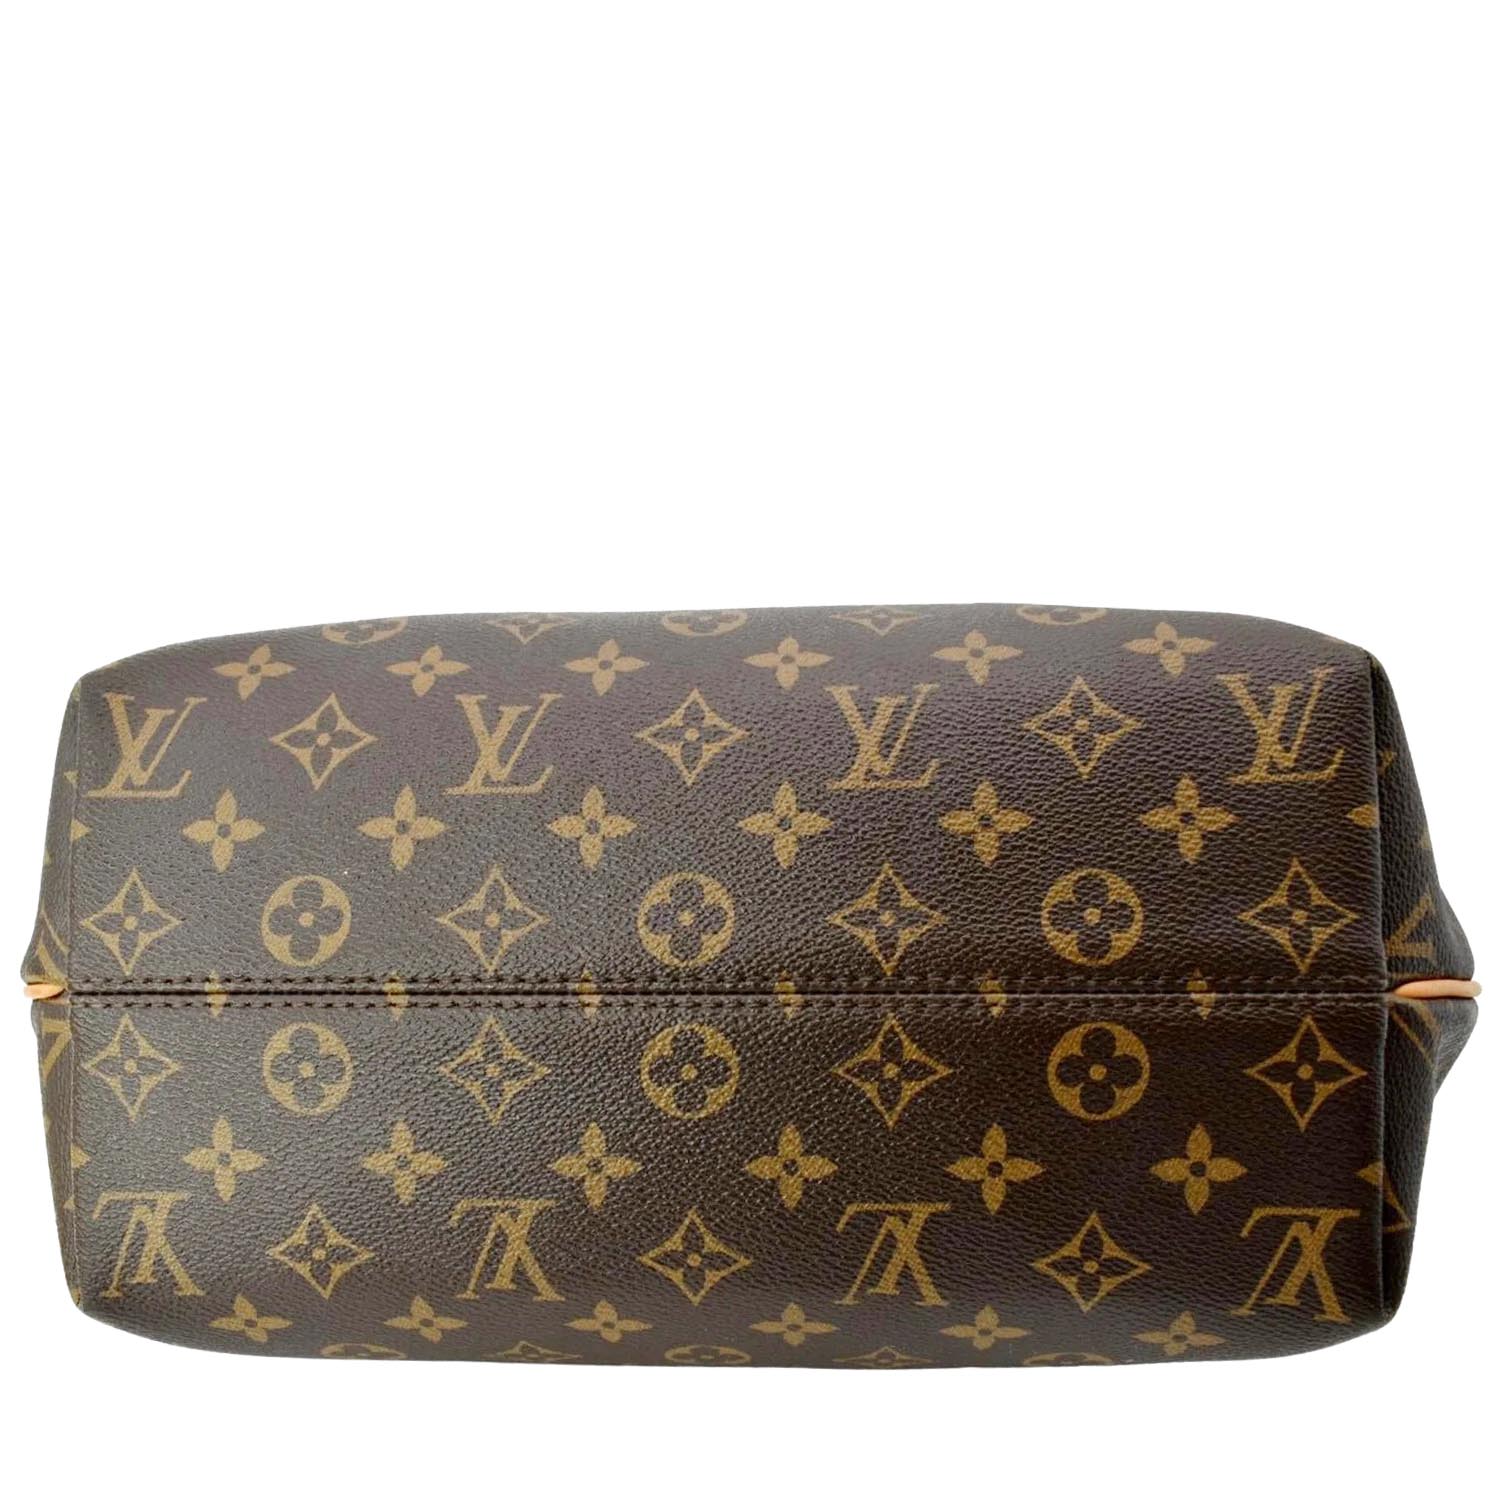 Louis Vuitton Turenne MM Coated Canvas Tote on SALE